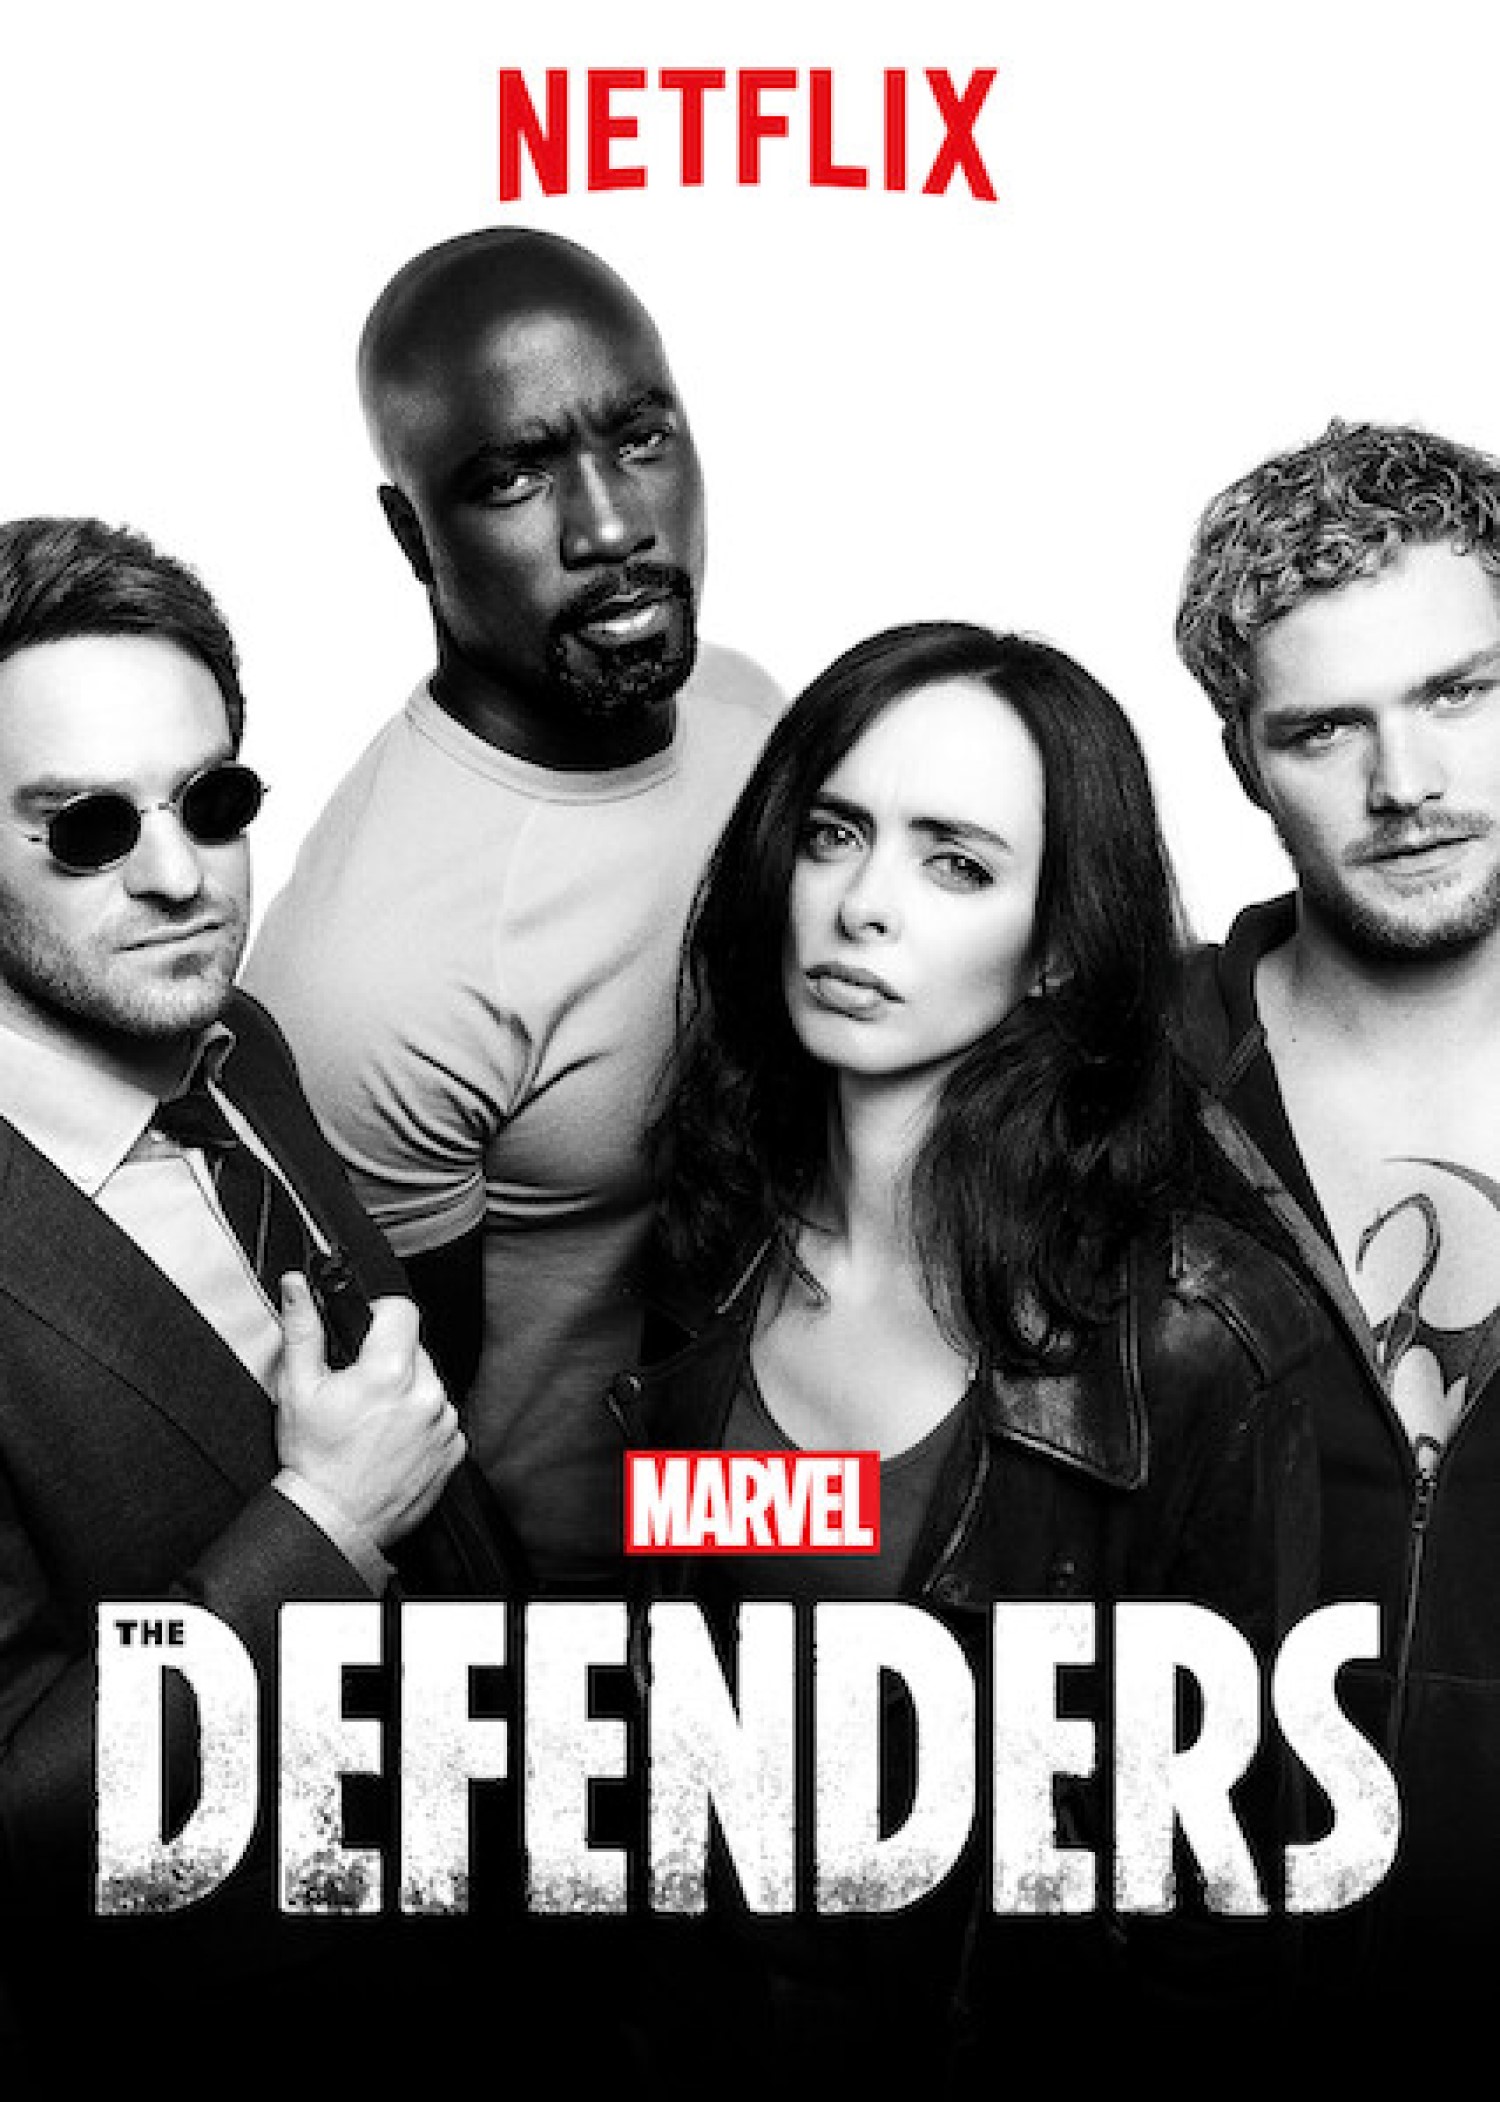 Marvel's The Defenders - Where to Watch and Stream - TV Guide